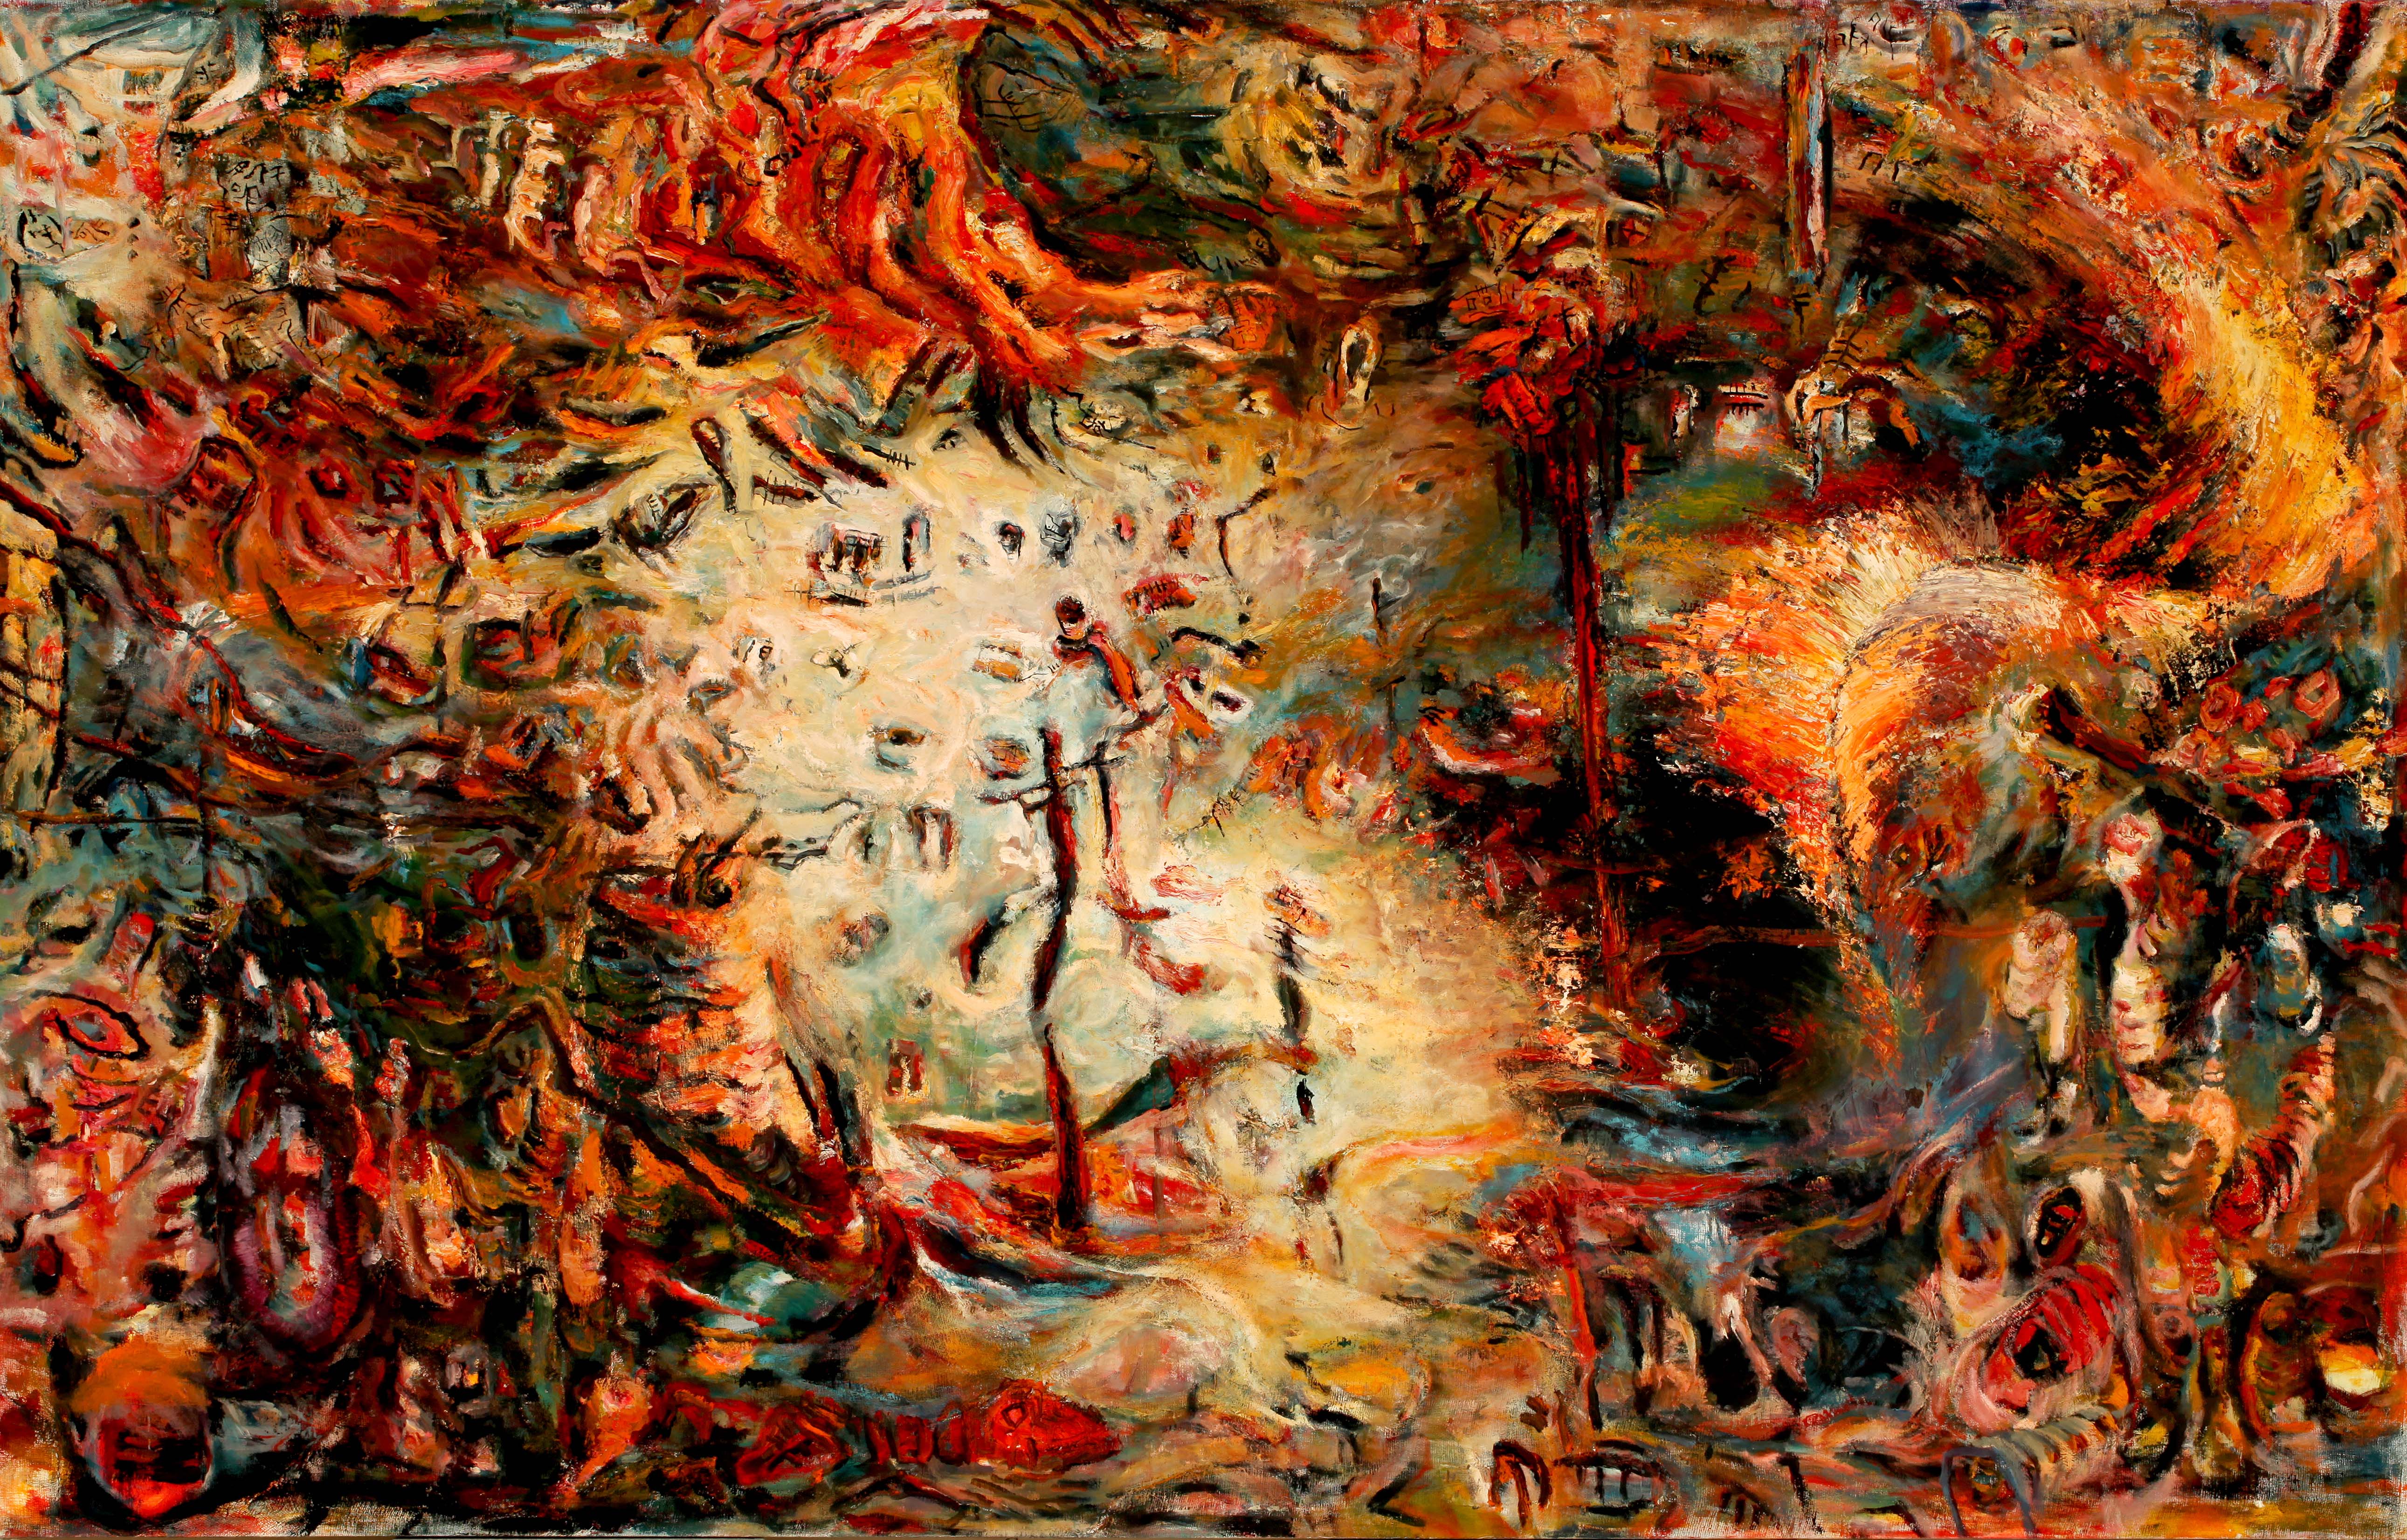 The Crazy City Series II, 68 x 84 inches, Oil on Canvas, 1991